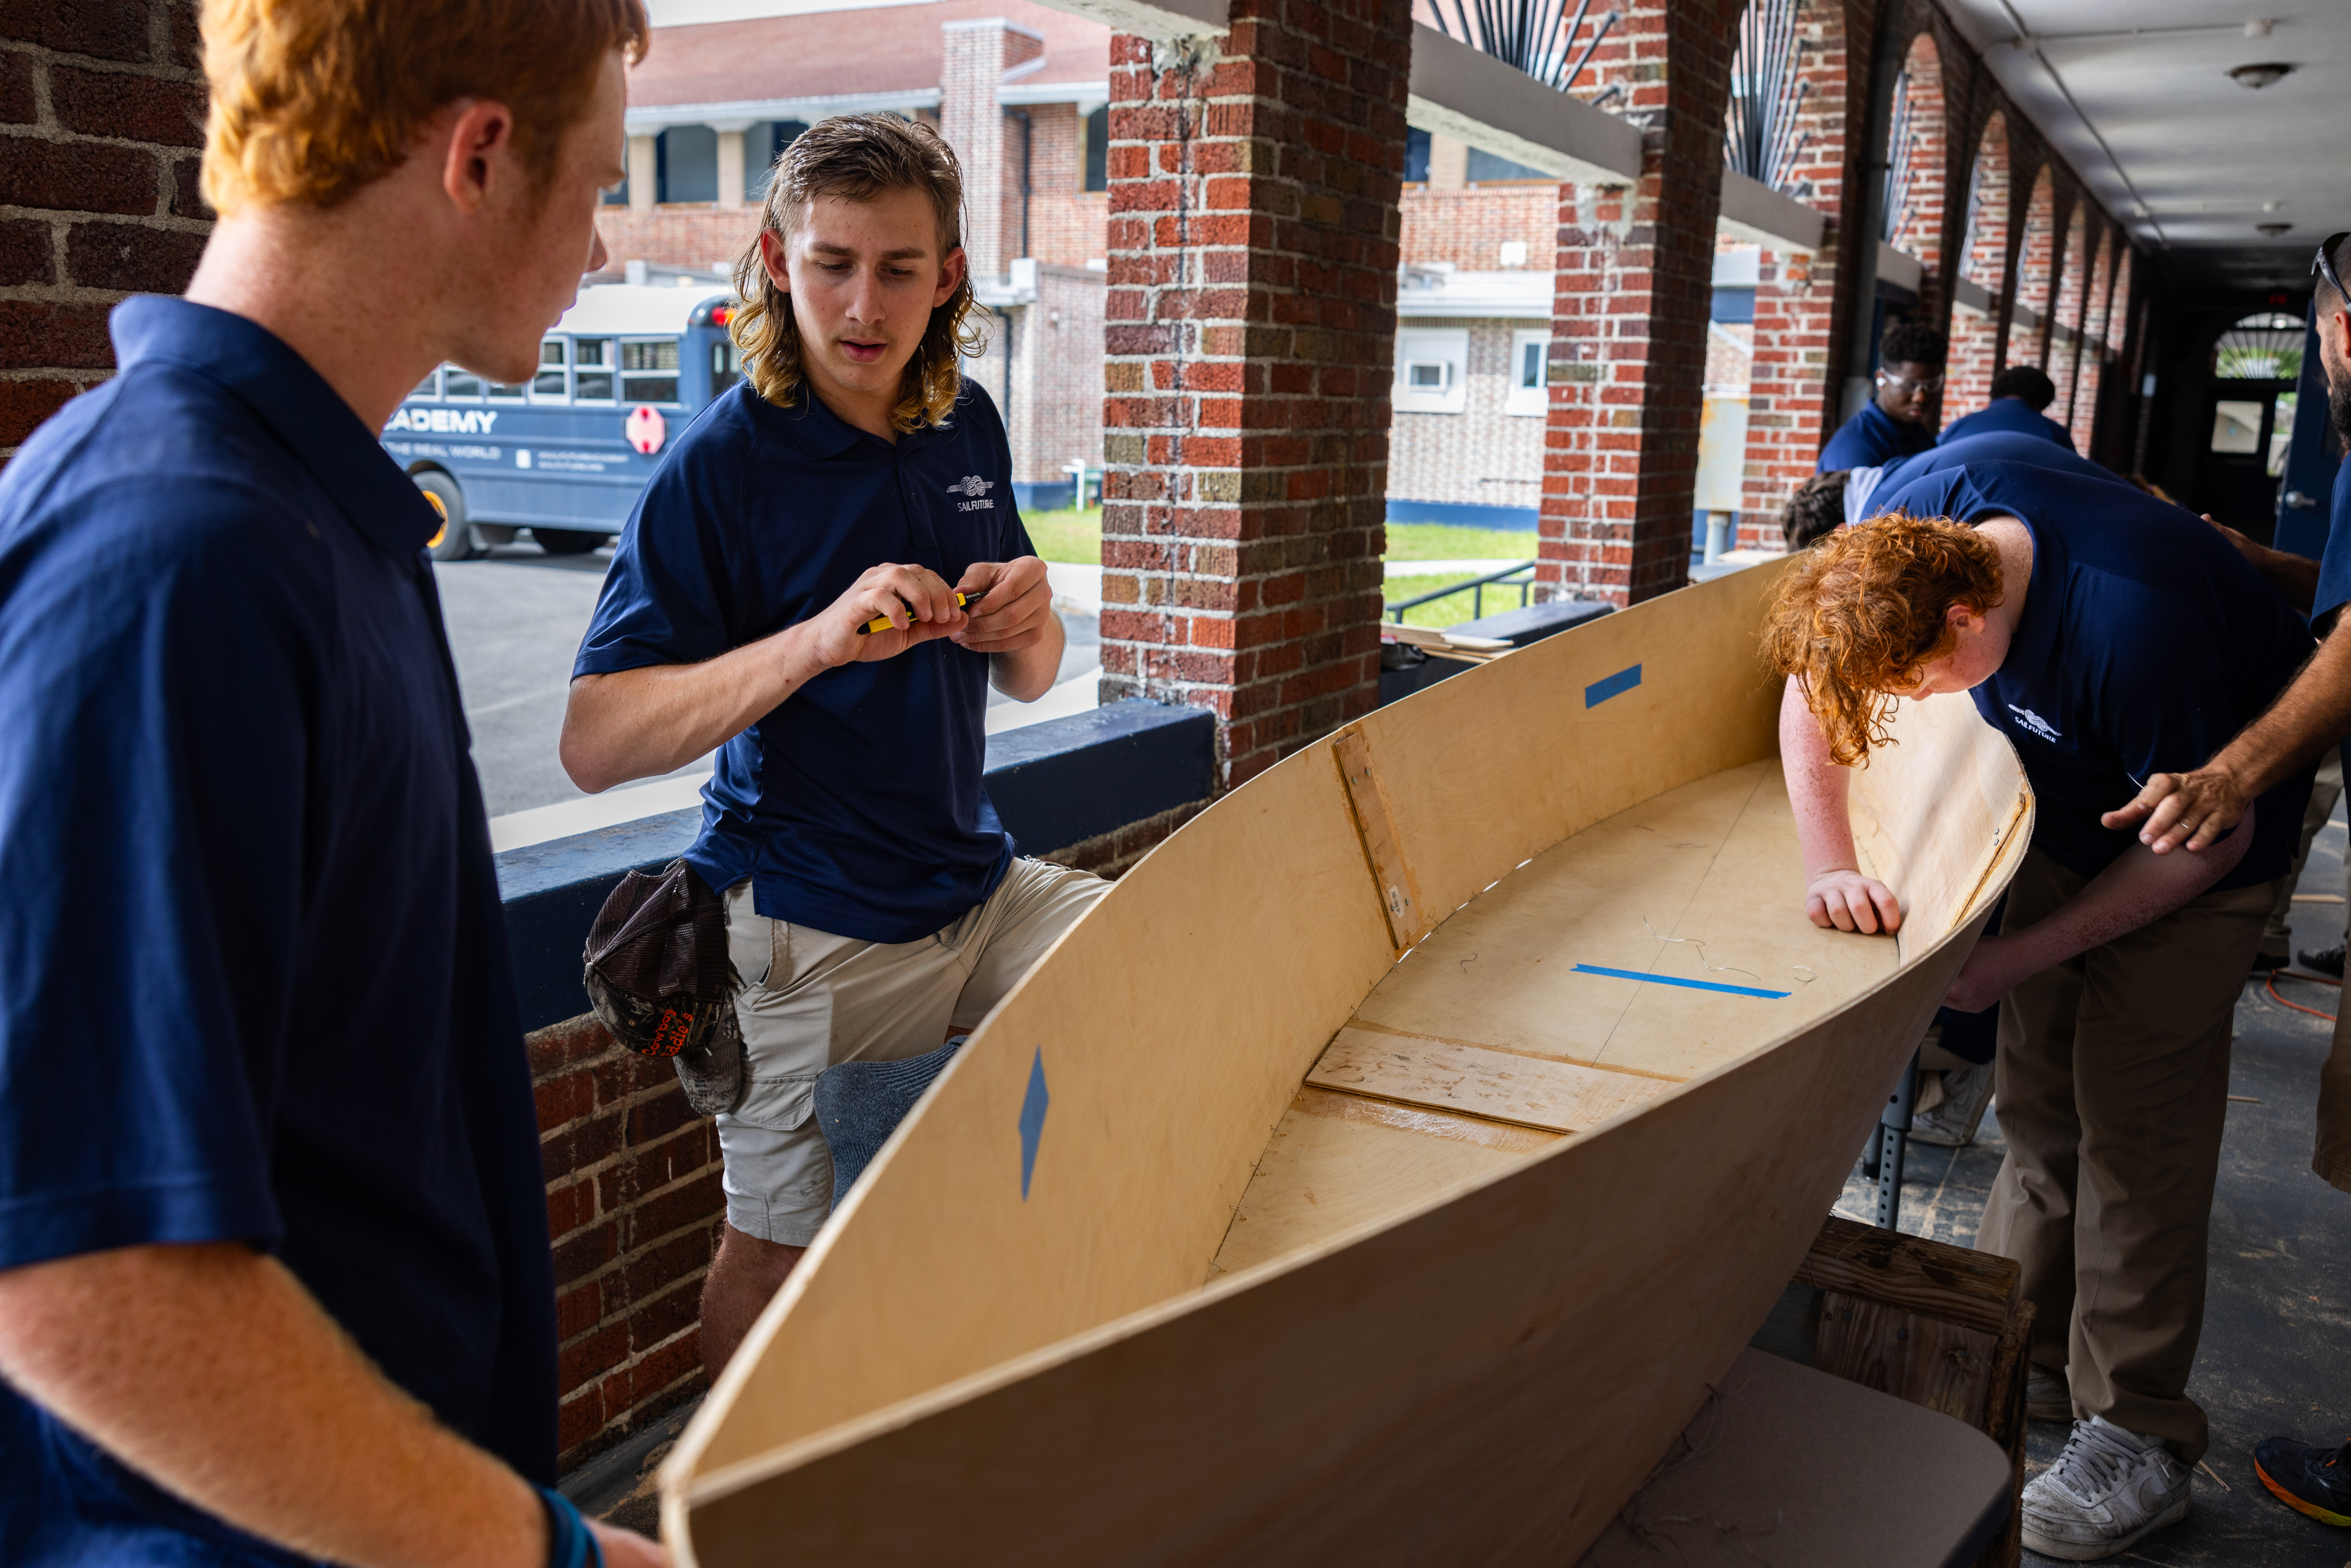 SailFuture Academy students building a wooden canoe